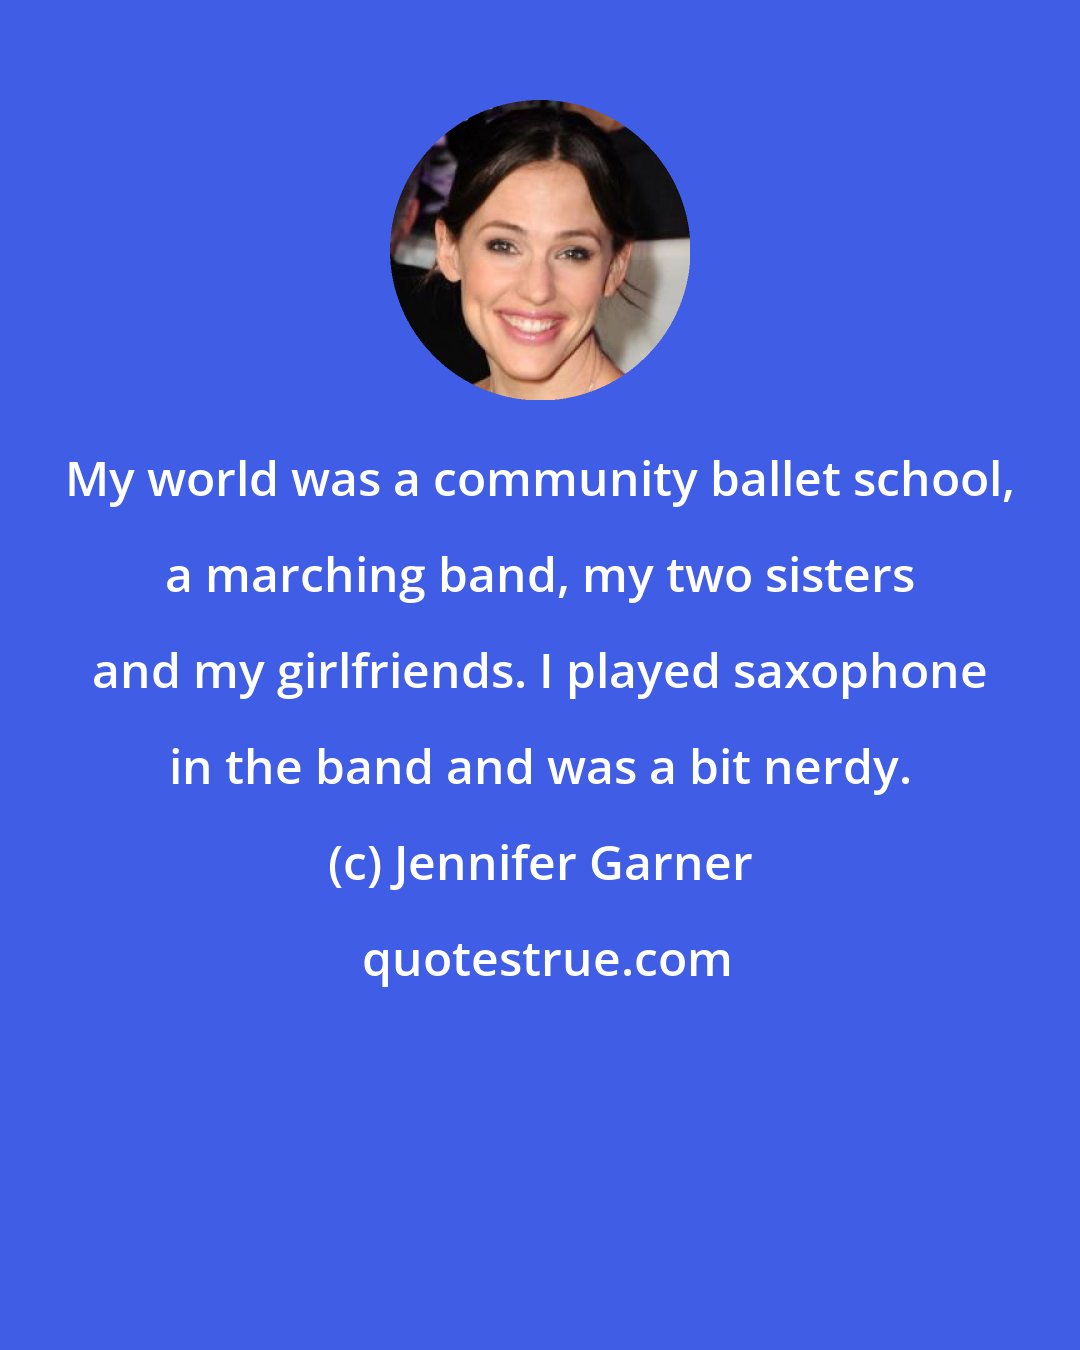 Jennifer Garner: My world was a community ballet school, a marching band, my two sisters and my girlfriends. I played saxophone in the band and was a bit nerdy.